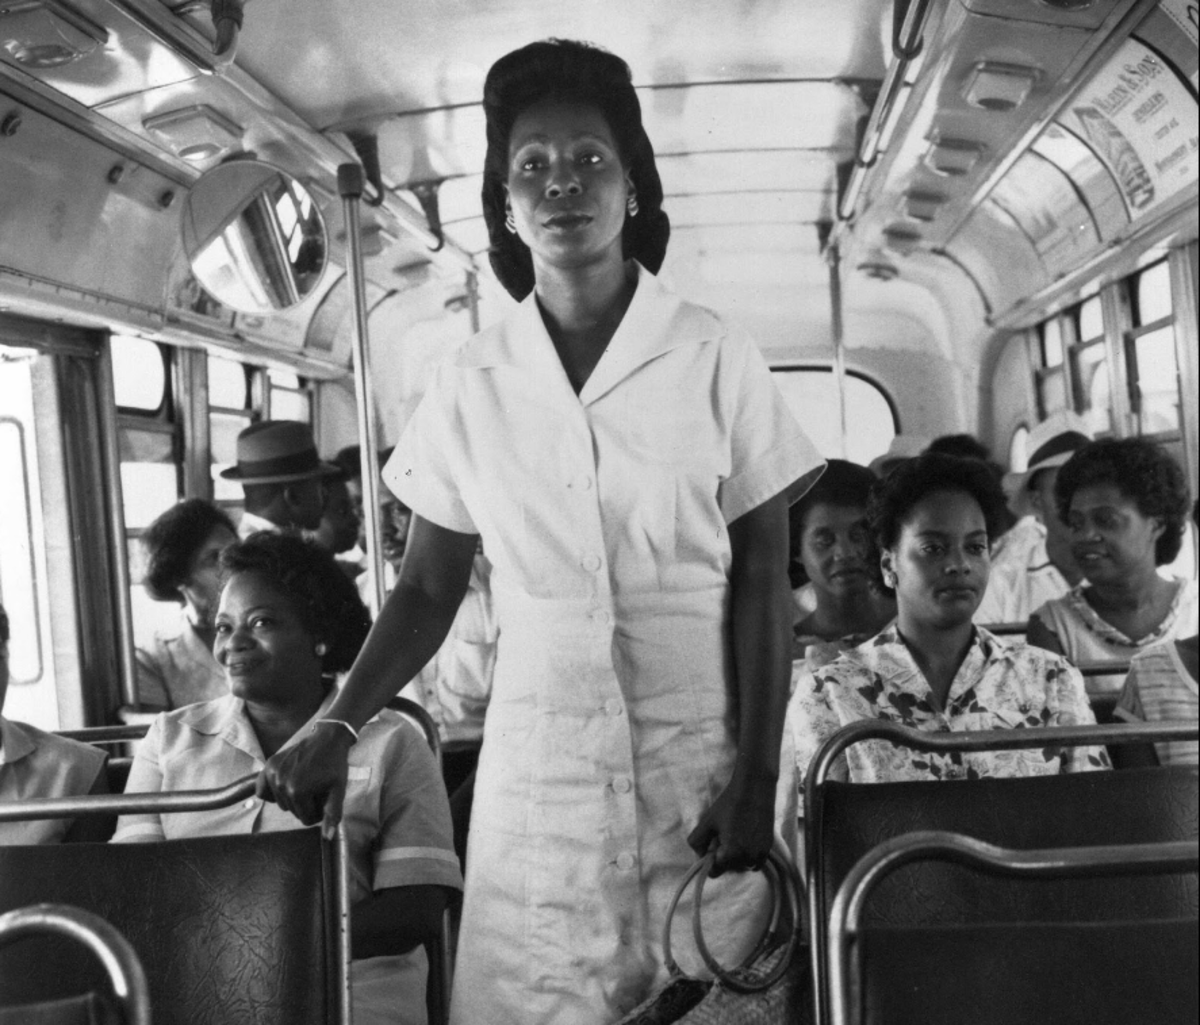 Days before the famous bus boycott, Odessa heads to the Thompson's to work